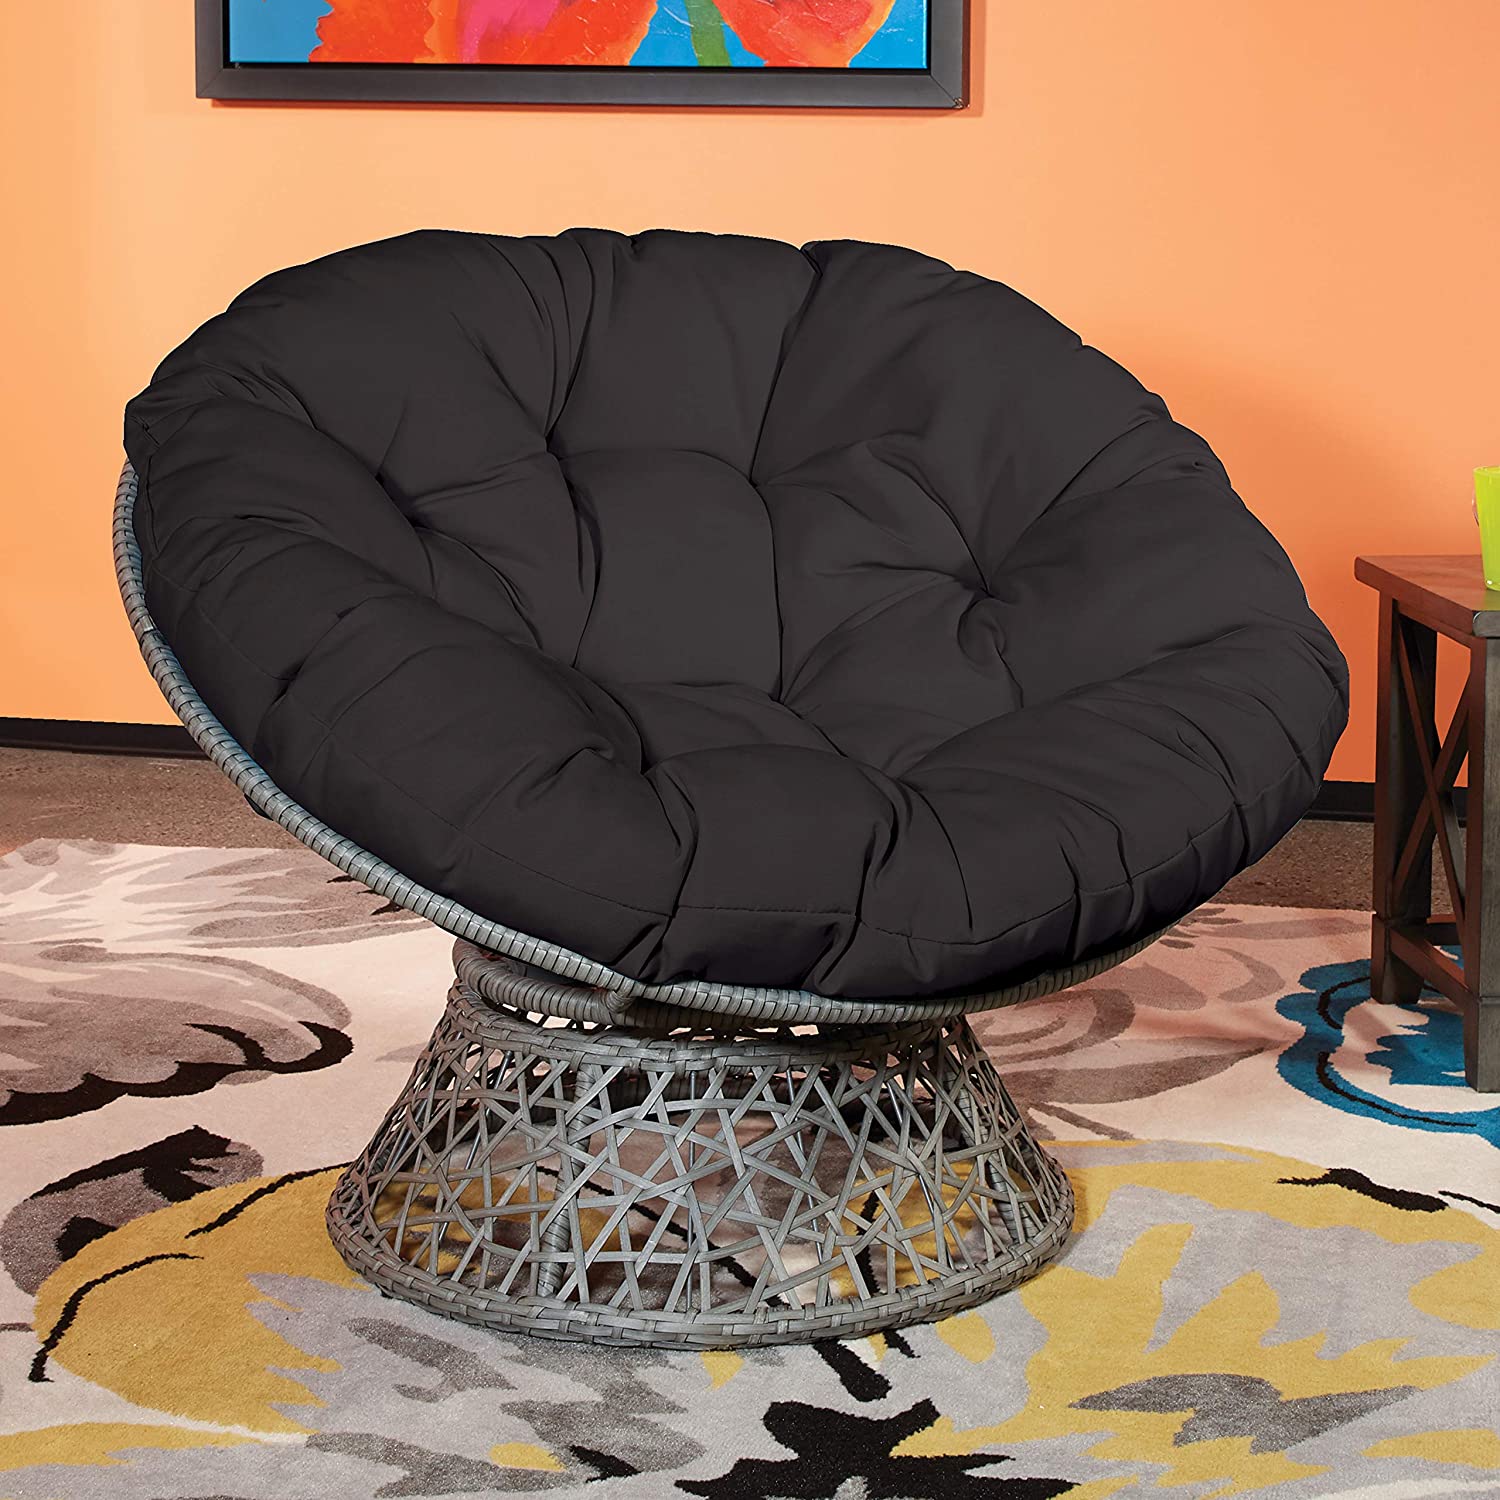 OSP design papasan chair 15 Unique Furniture Designs for Outdoor Small Spaces - 35